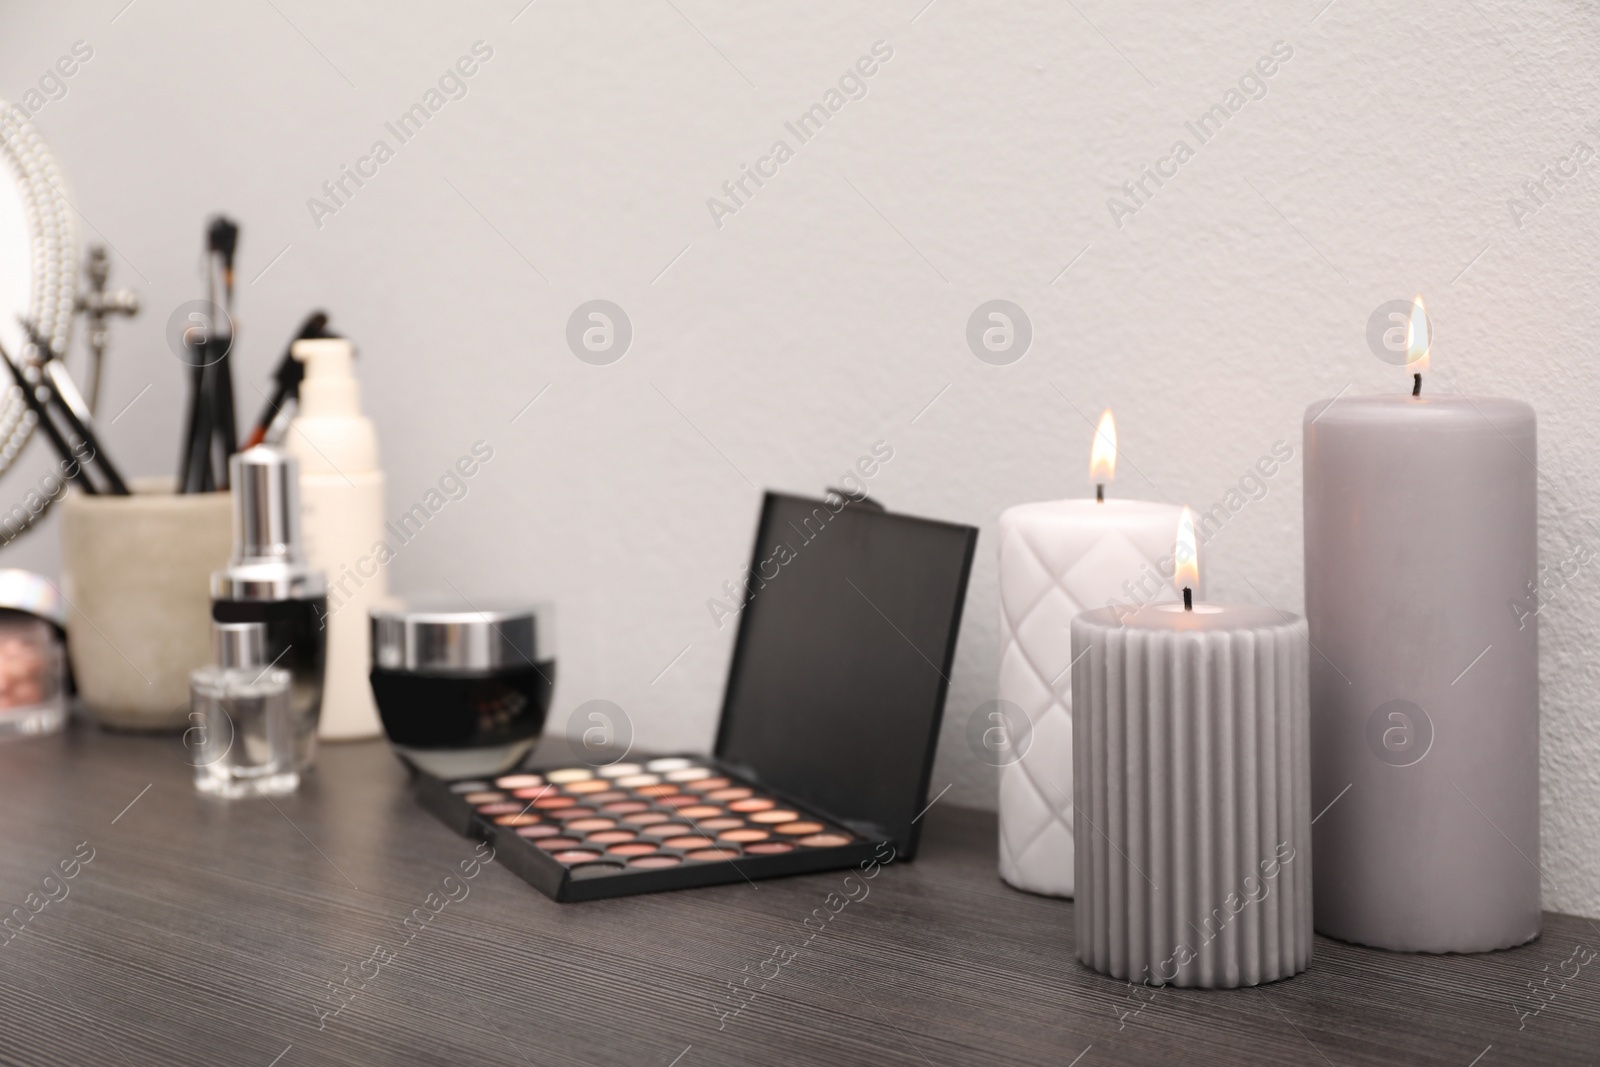 Photo of Mirror, candles and different makeup products on dark wooden dressing table near wall